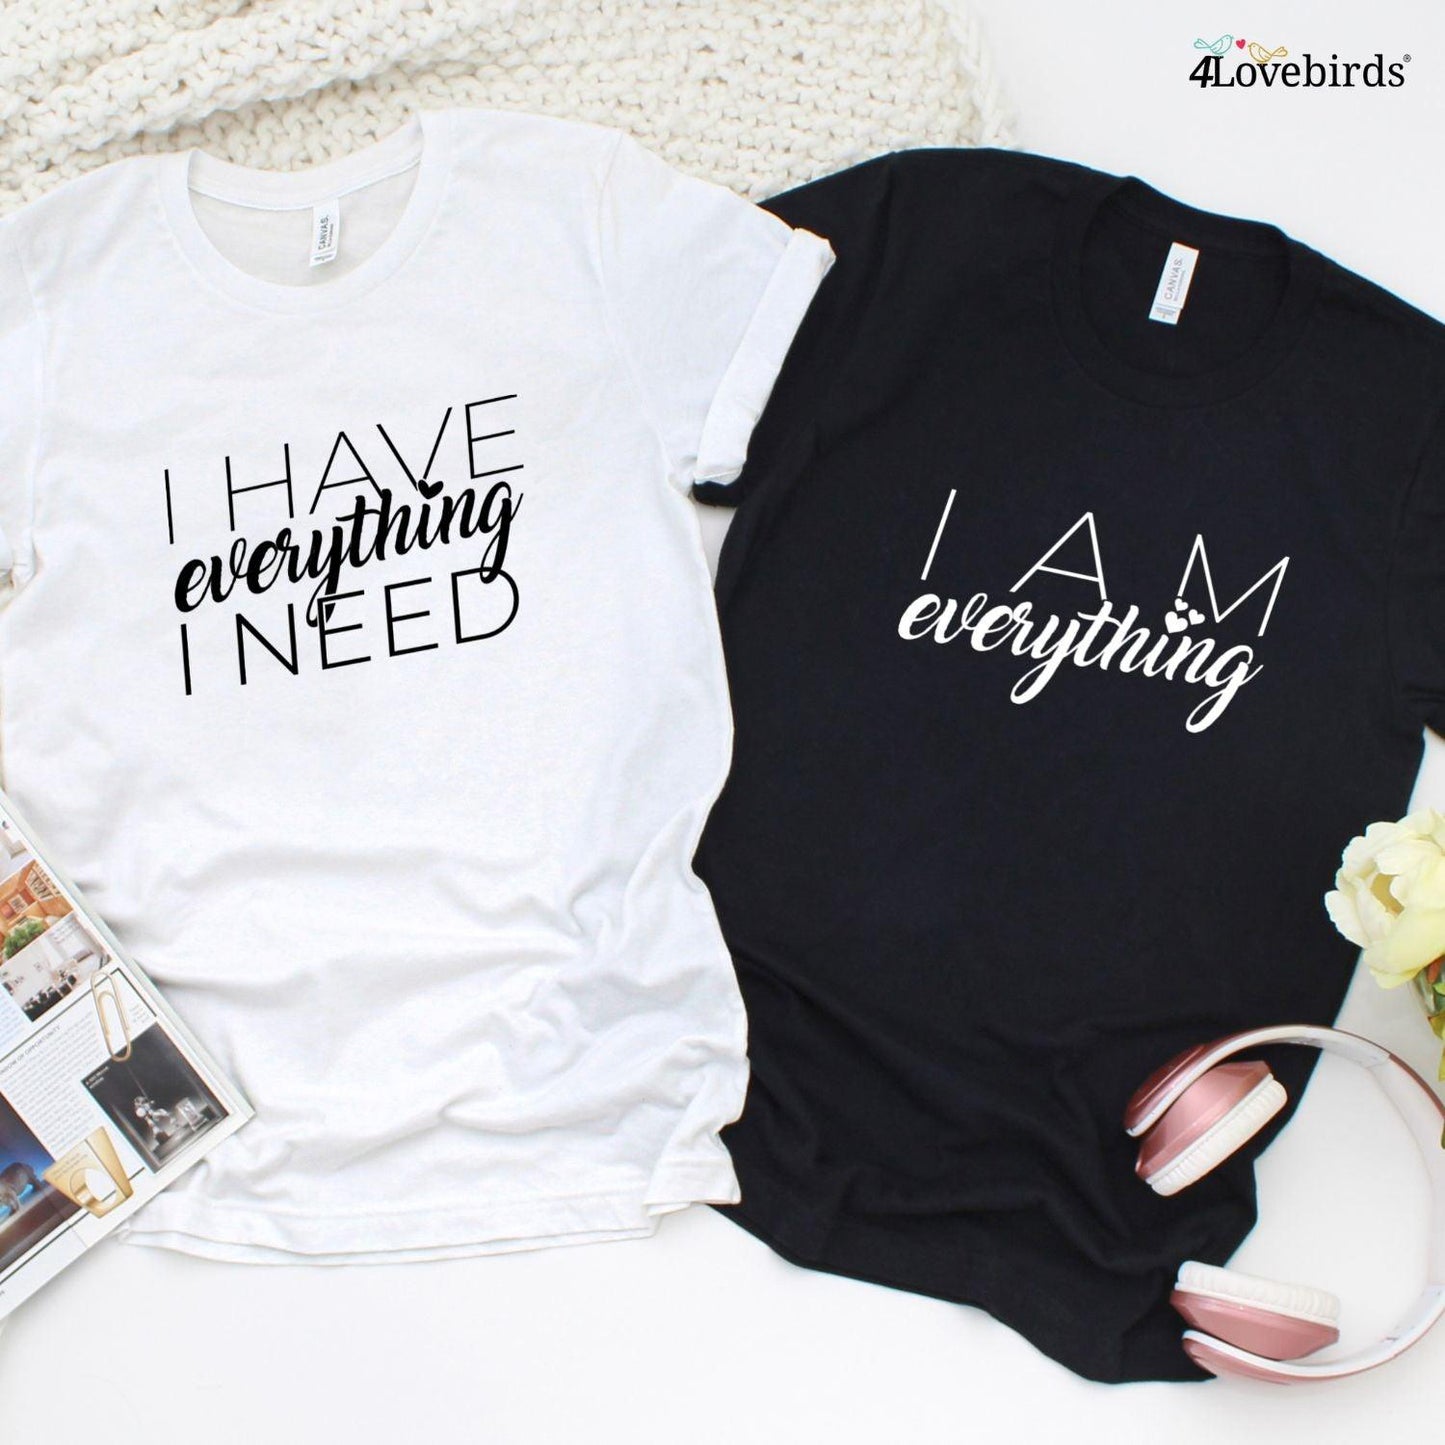 His & Hers Matching Set: Everything I Need & Everything I Am. Perfect Wedding & Anniversary Gift! - 4Lovebirds